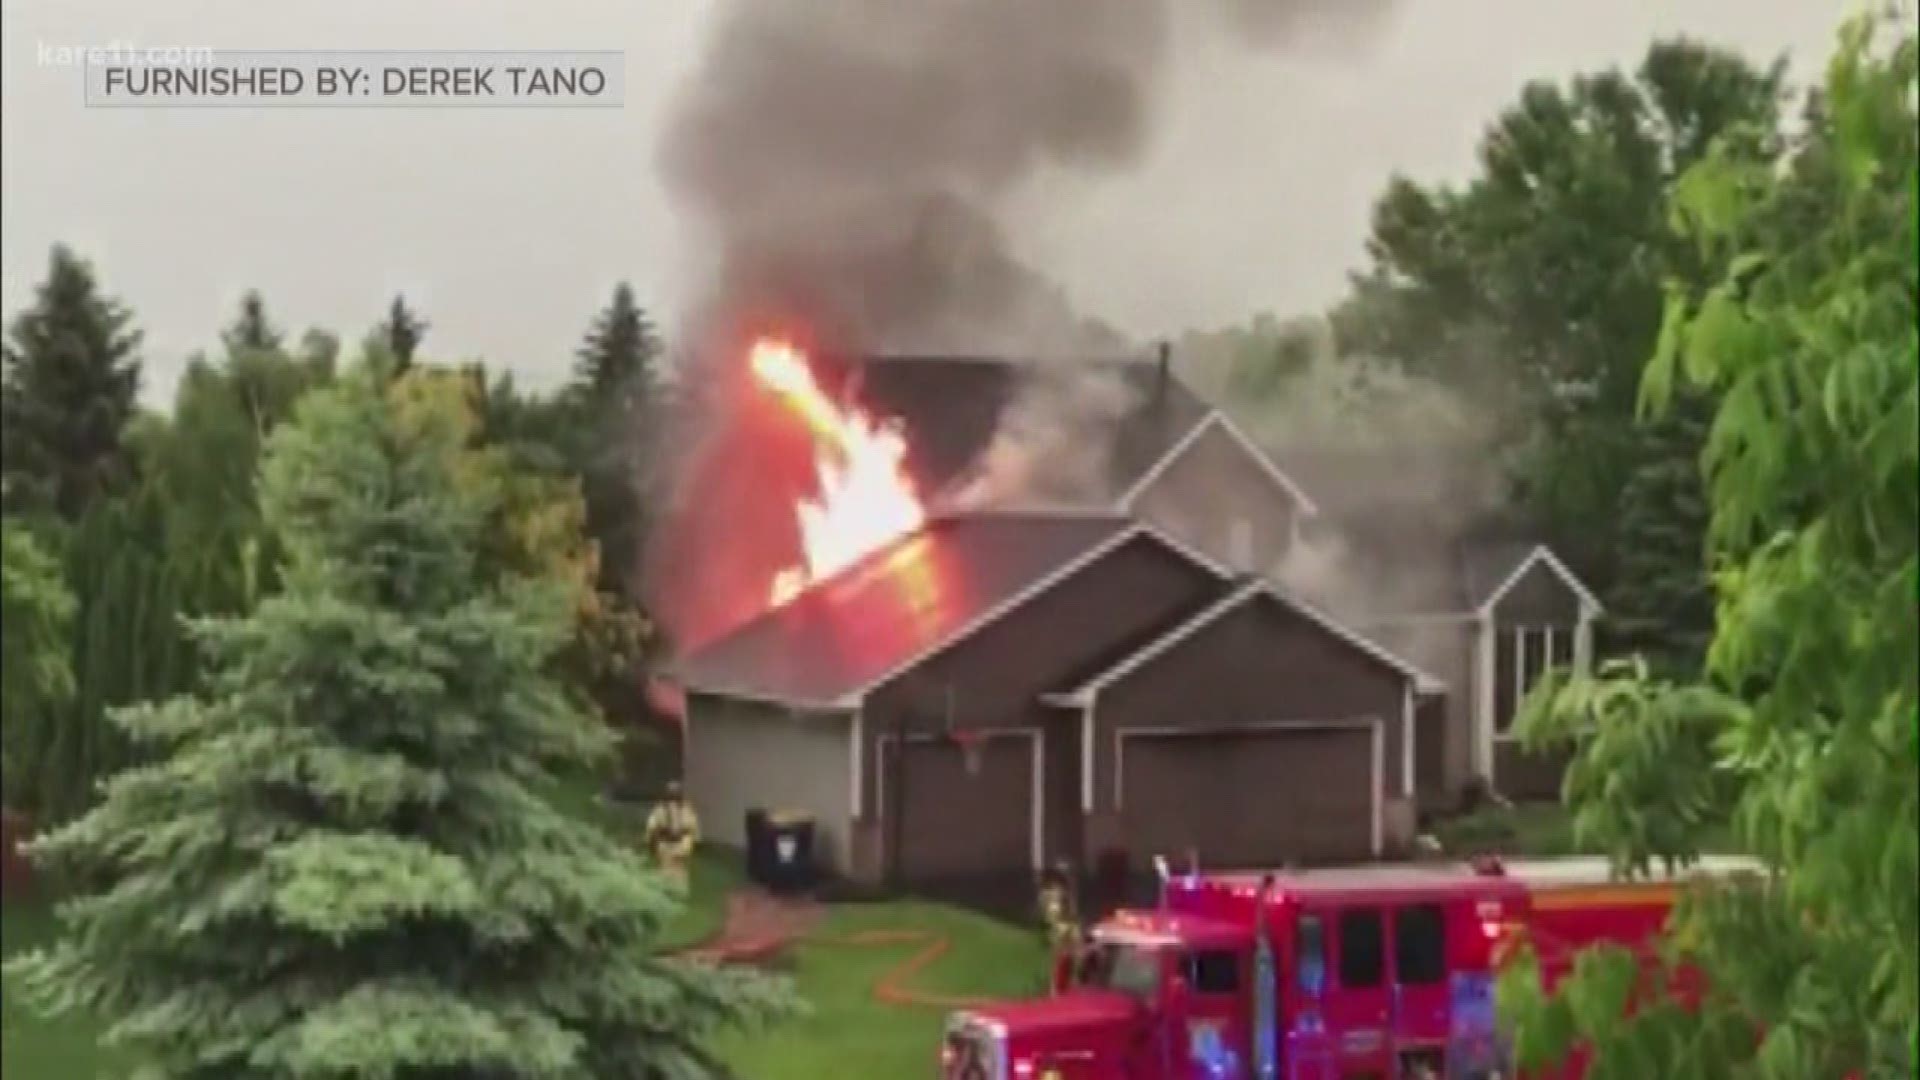 Lakeville fire chief Mike Meyer says lightning is blamed for at least four house fires as a storm blew through his city Tuesday.